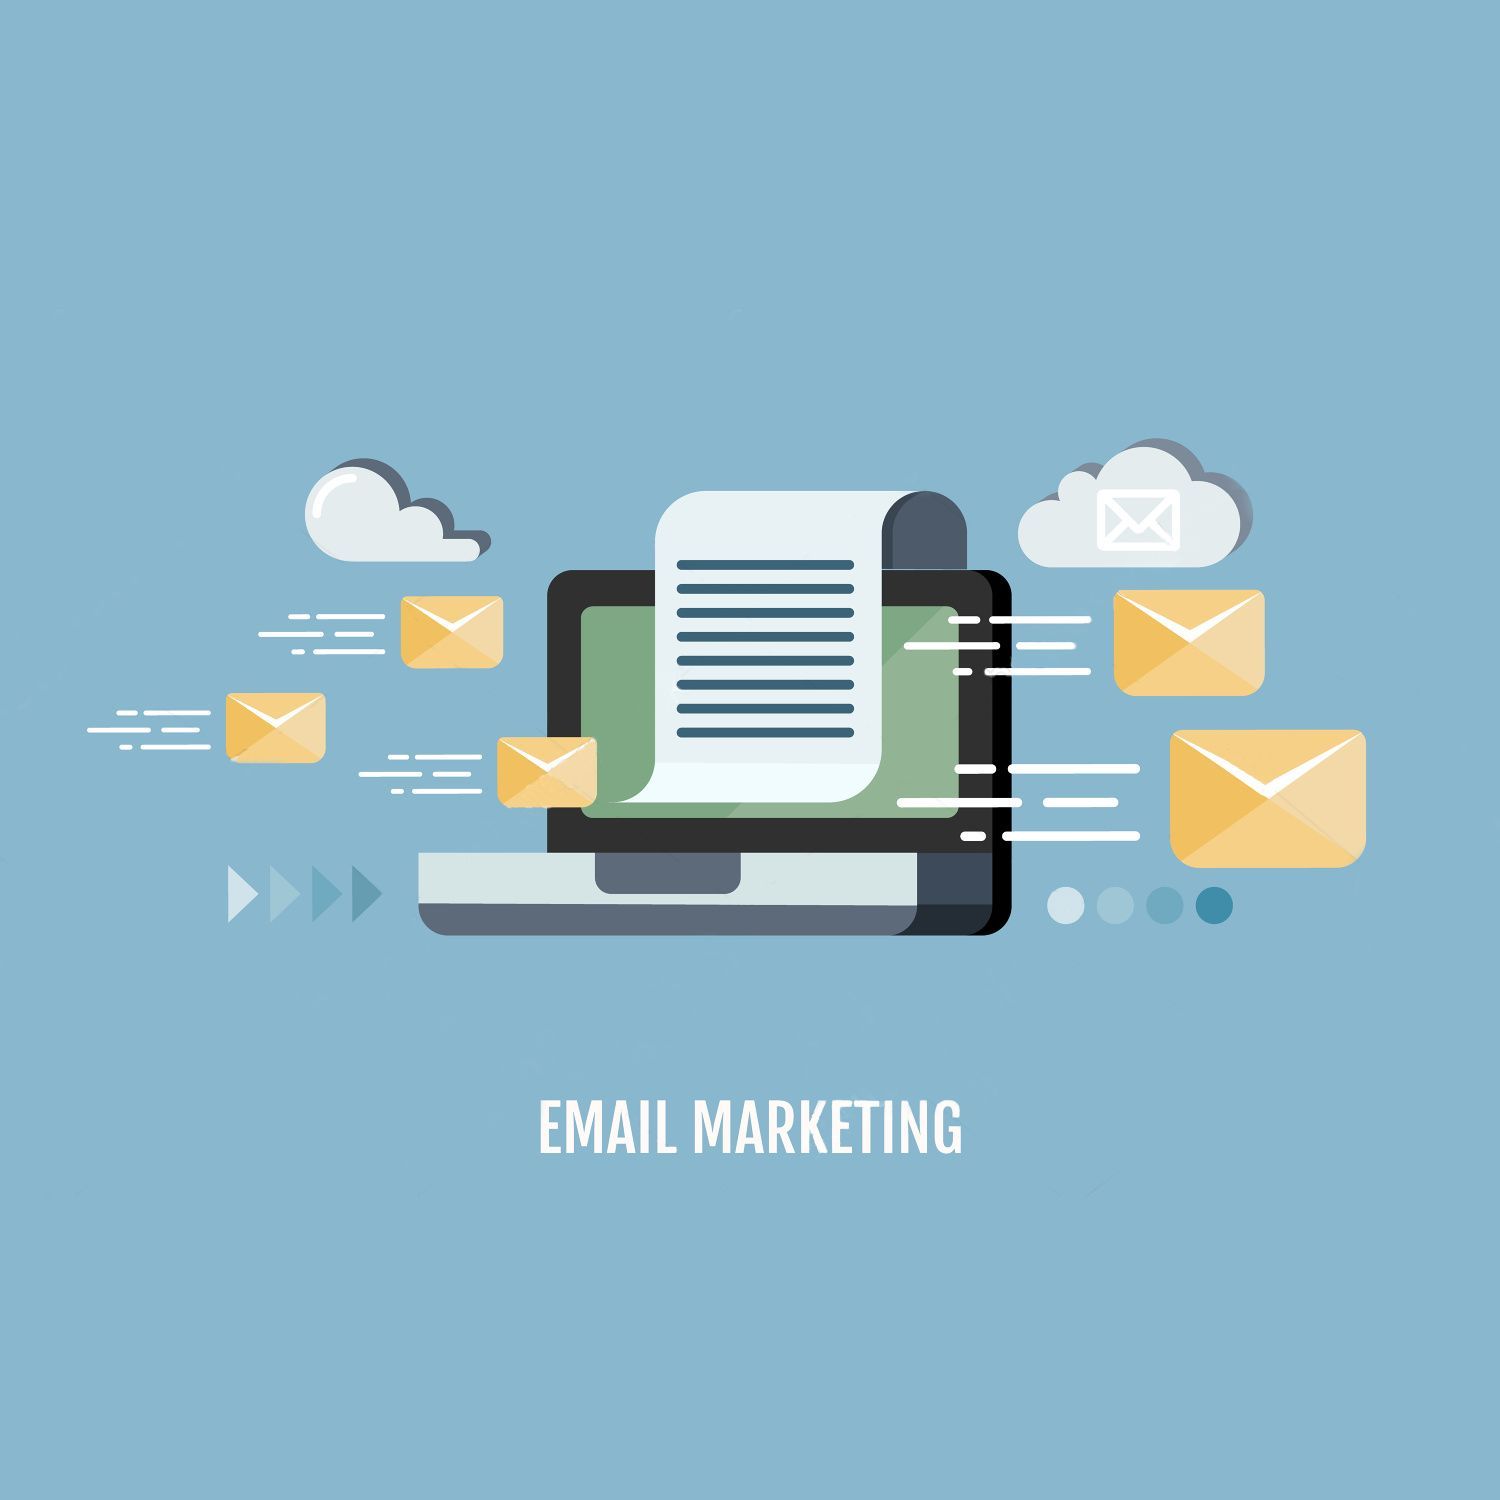 Creating a High-Quality Email List